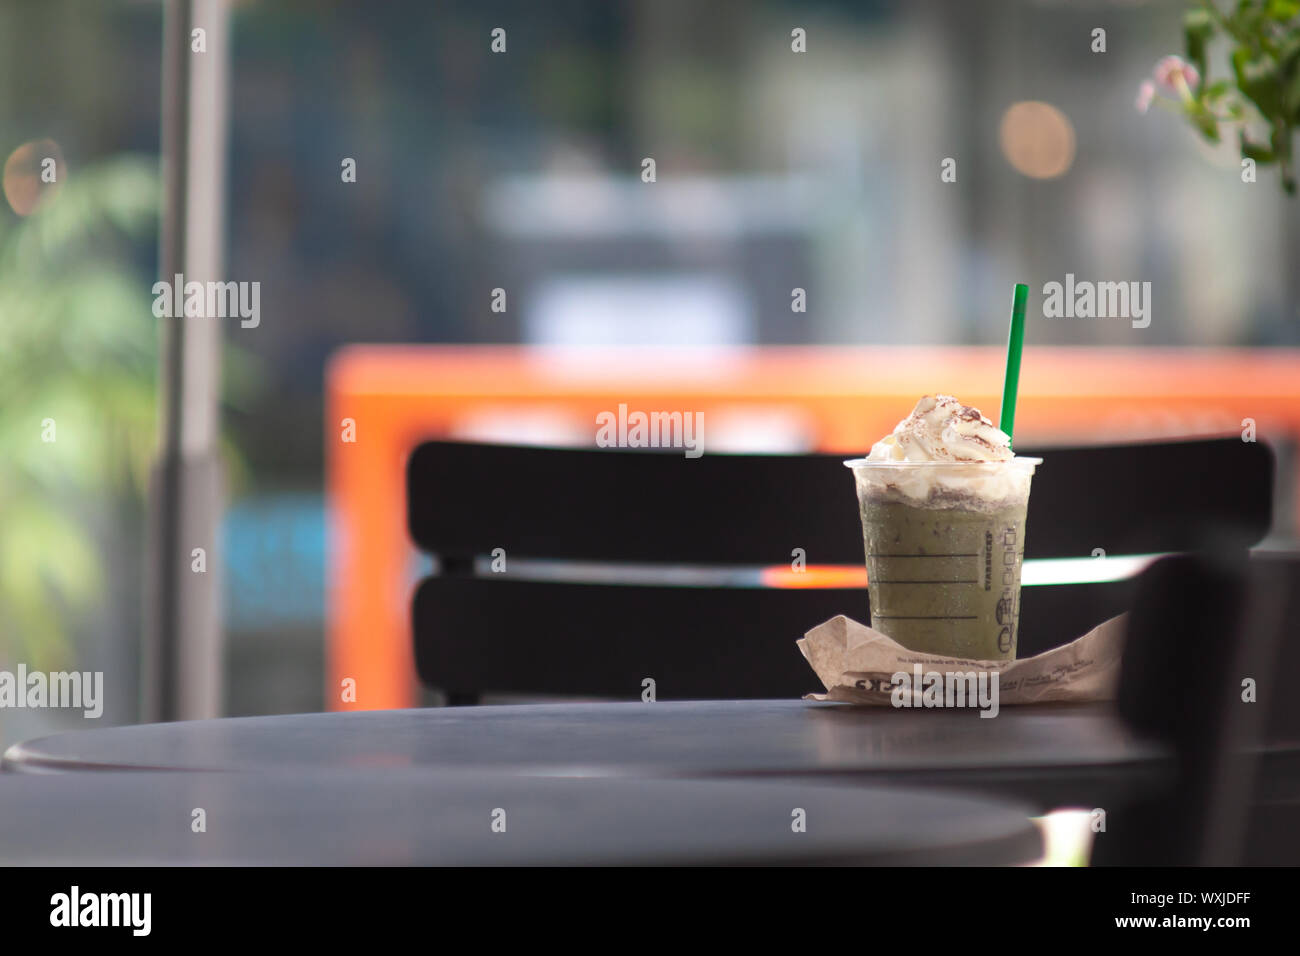 Bangkok, Thailand - Sep 1, 2019: a grande size cup of Starbuck coffee on the outdoor table. Starbucks take away green tea frappuccino cup with logo, b Stock Photo